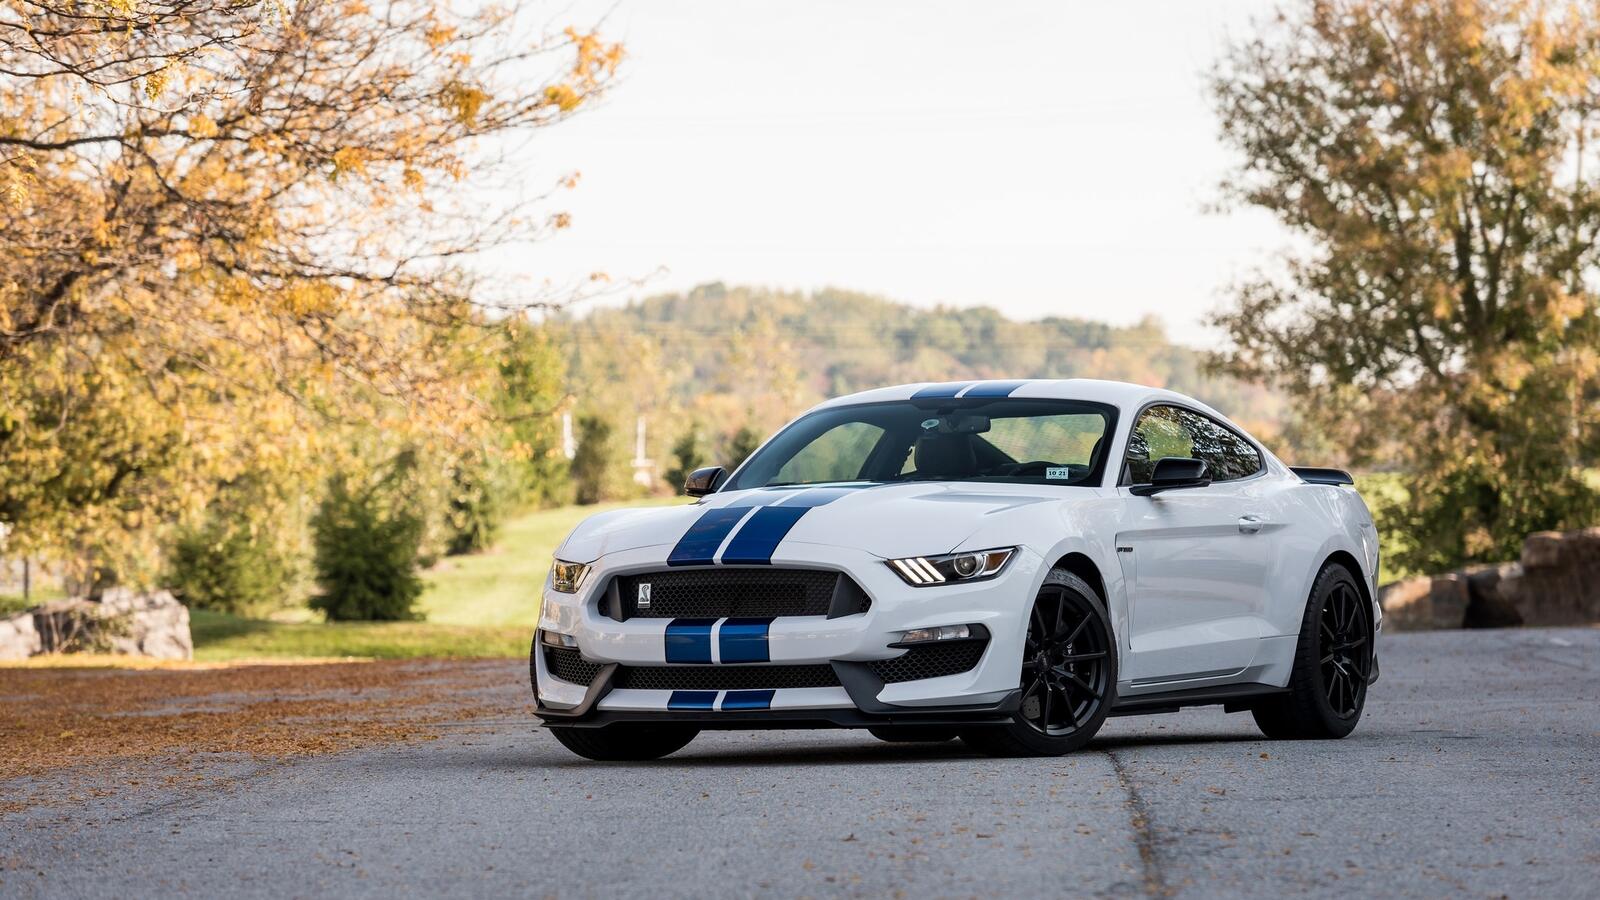 One of the girls streets white mustang. Ford Mustang Shelby gt350. 2018 Ford Mustang Shelby gt350. Форд Шелби gt 350. Форд Мустанг Шелби 2021.